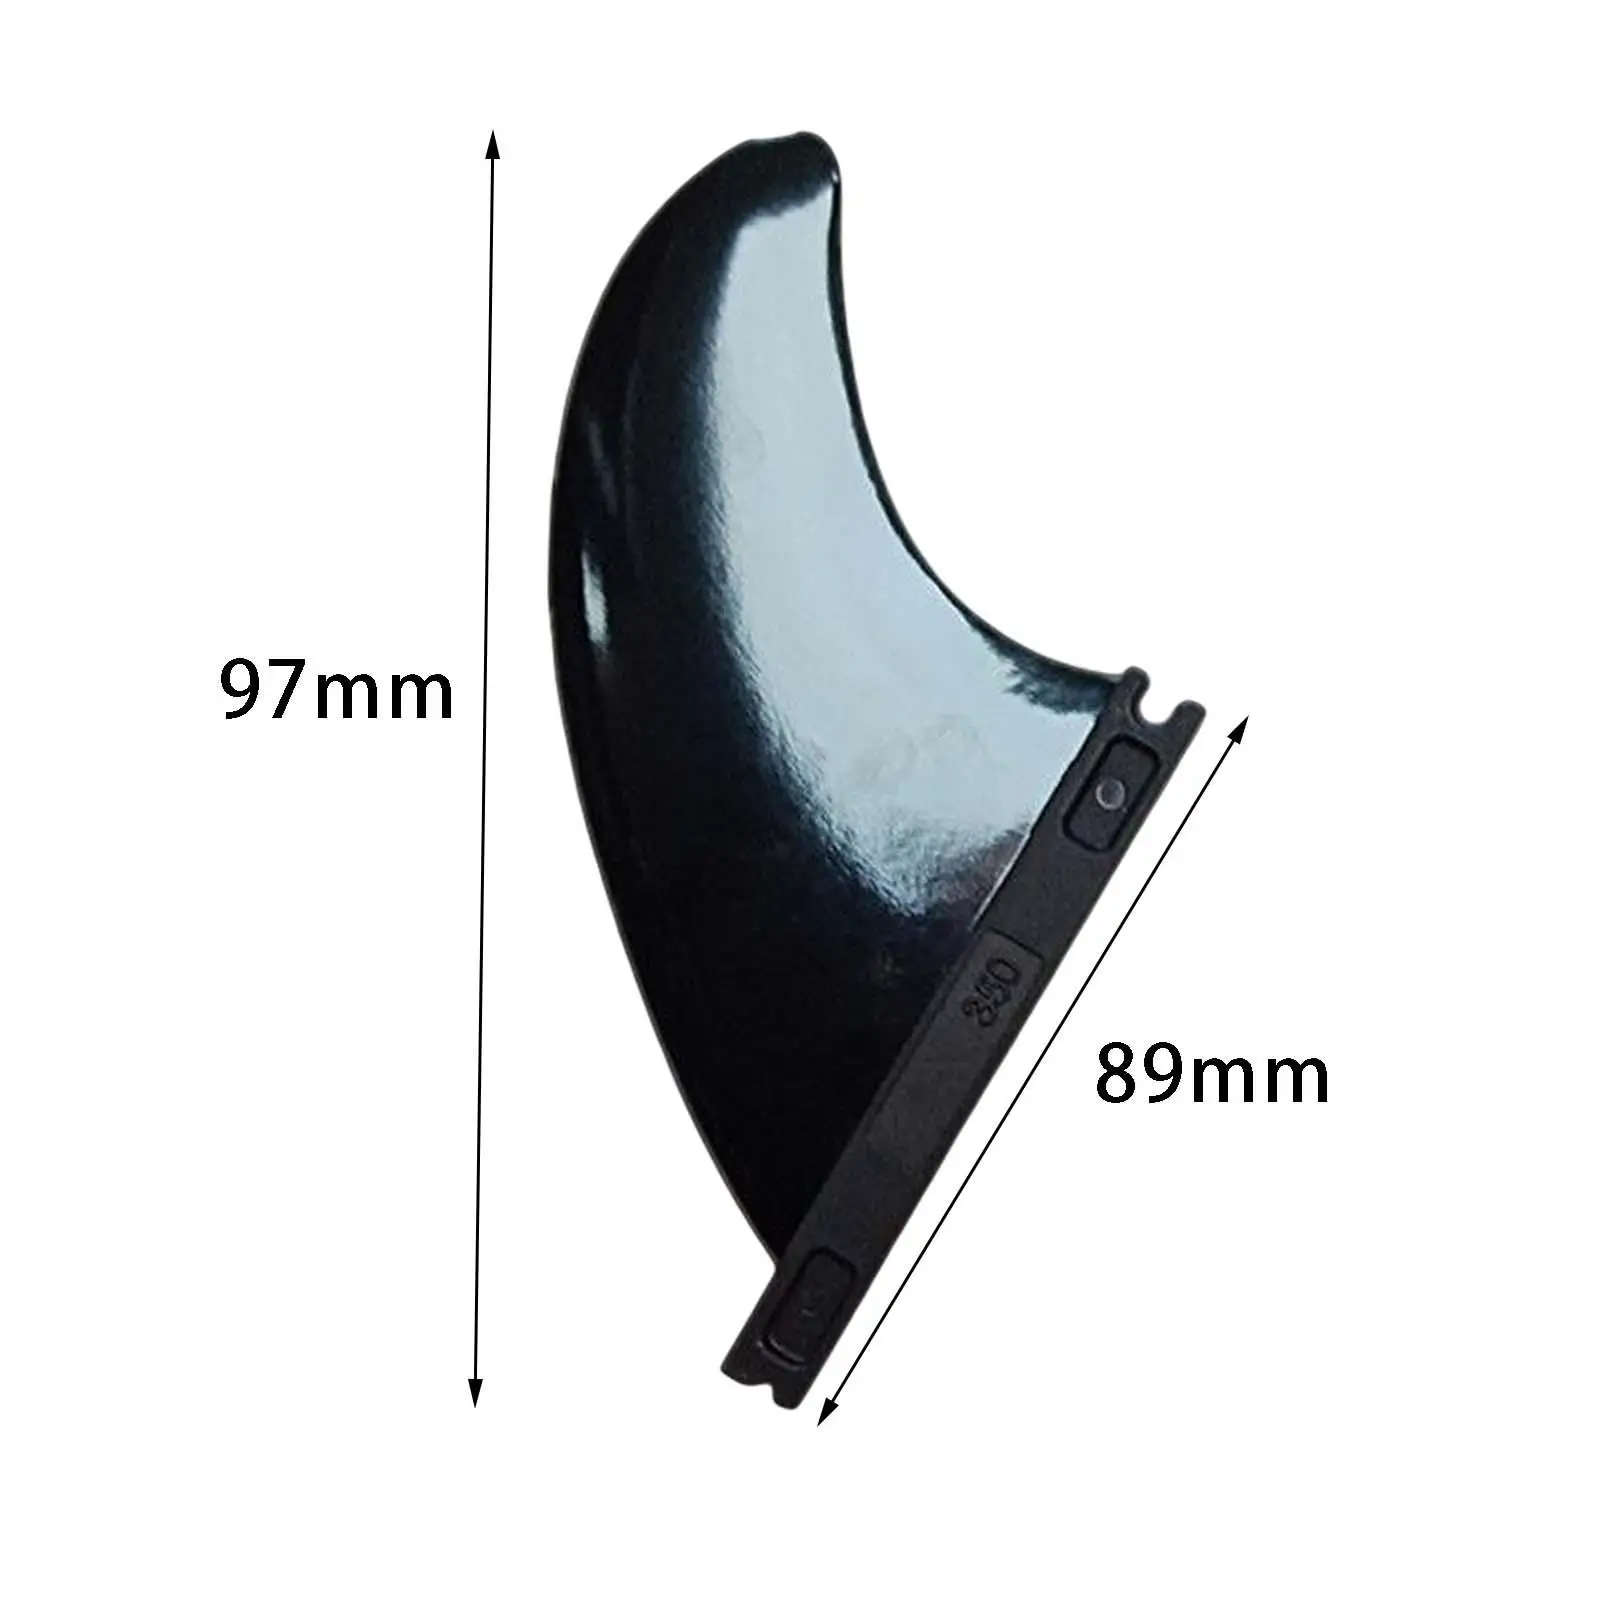 2x Surfboard Fin Inflatable Paddleboard Tail Rudder Long Board Replacement